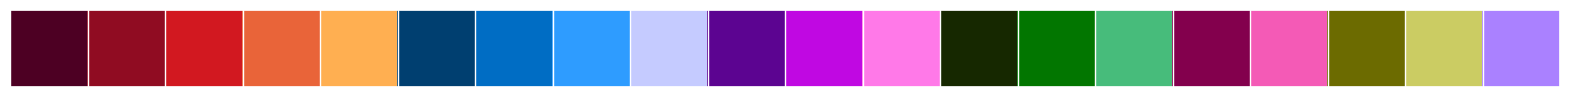 _images/creating_block_palettes_7_0.png